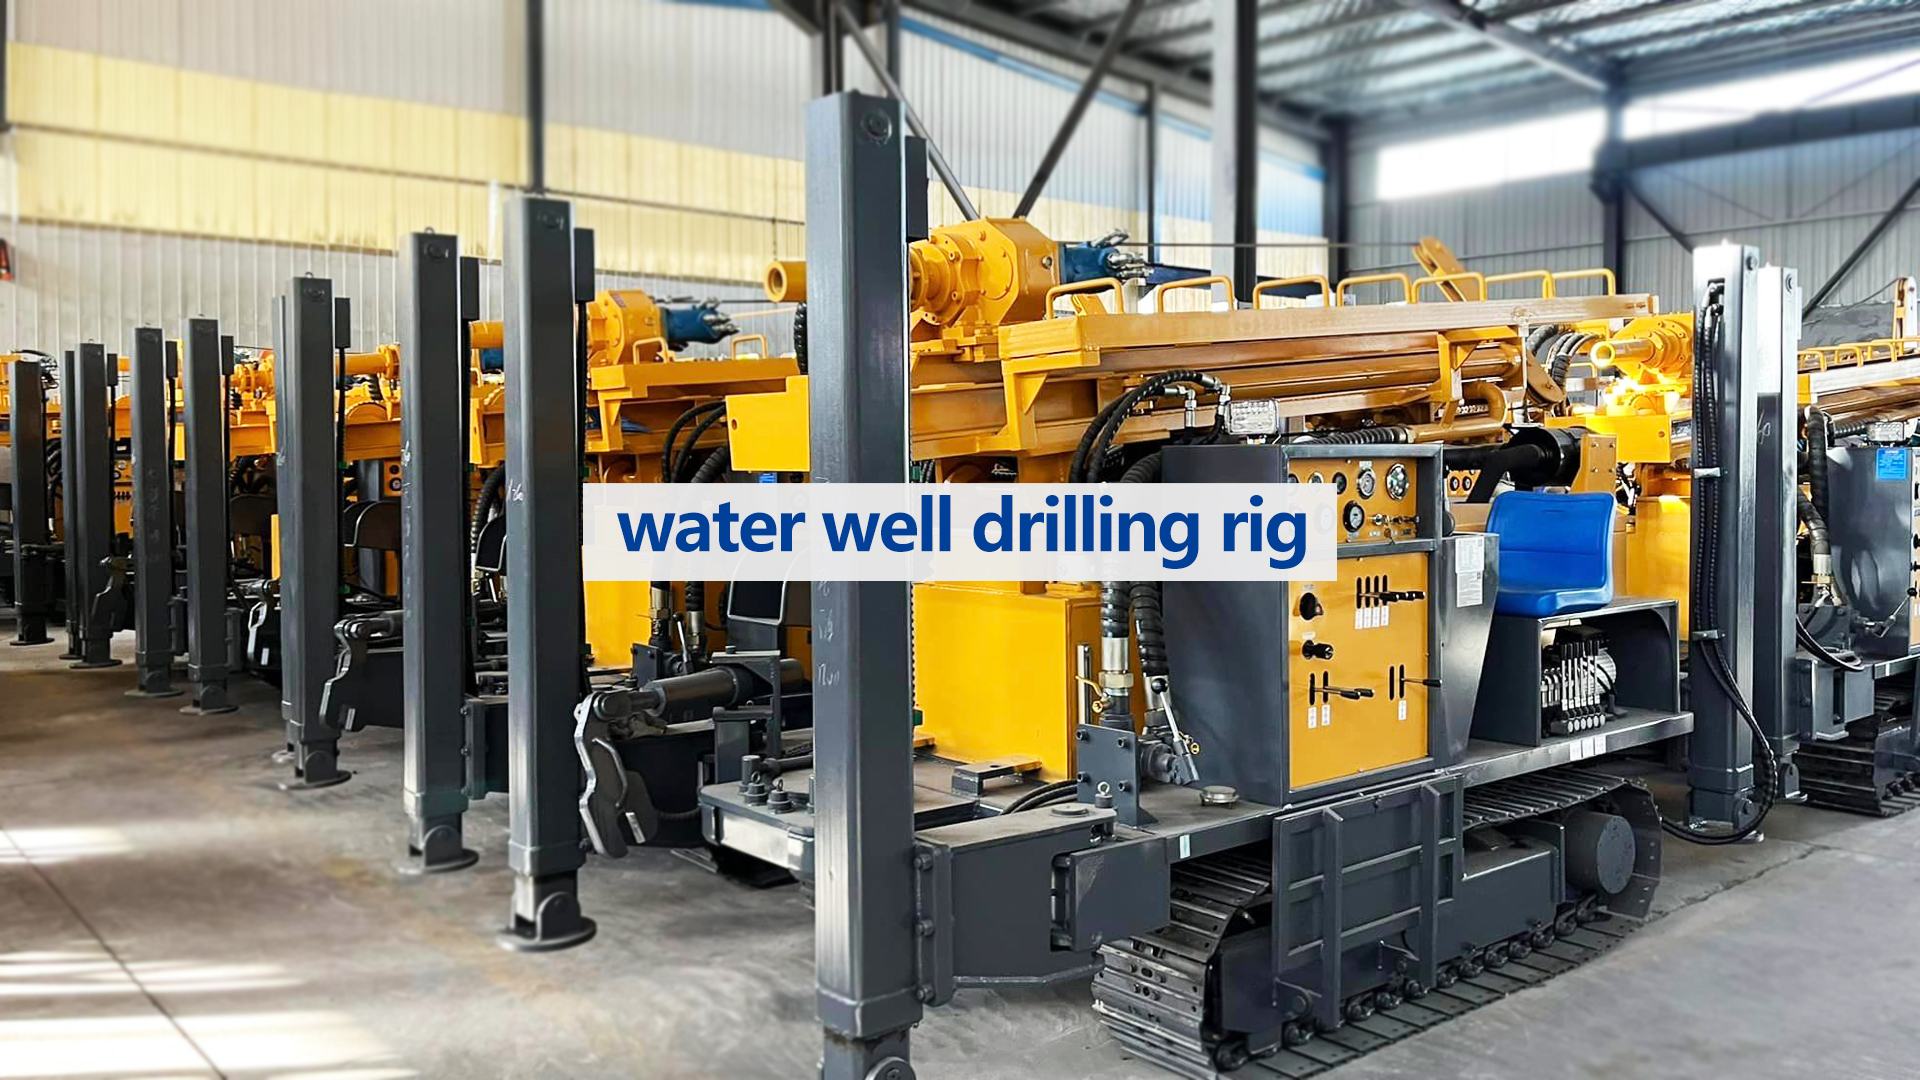 Rubber Tracked Water Well Drilling Rig vs Steel Tracked Water Well Drilling Rig